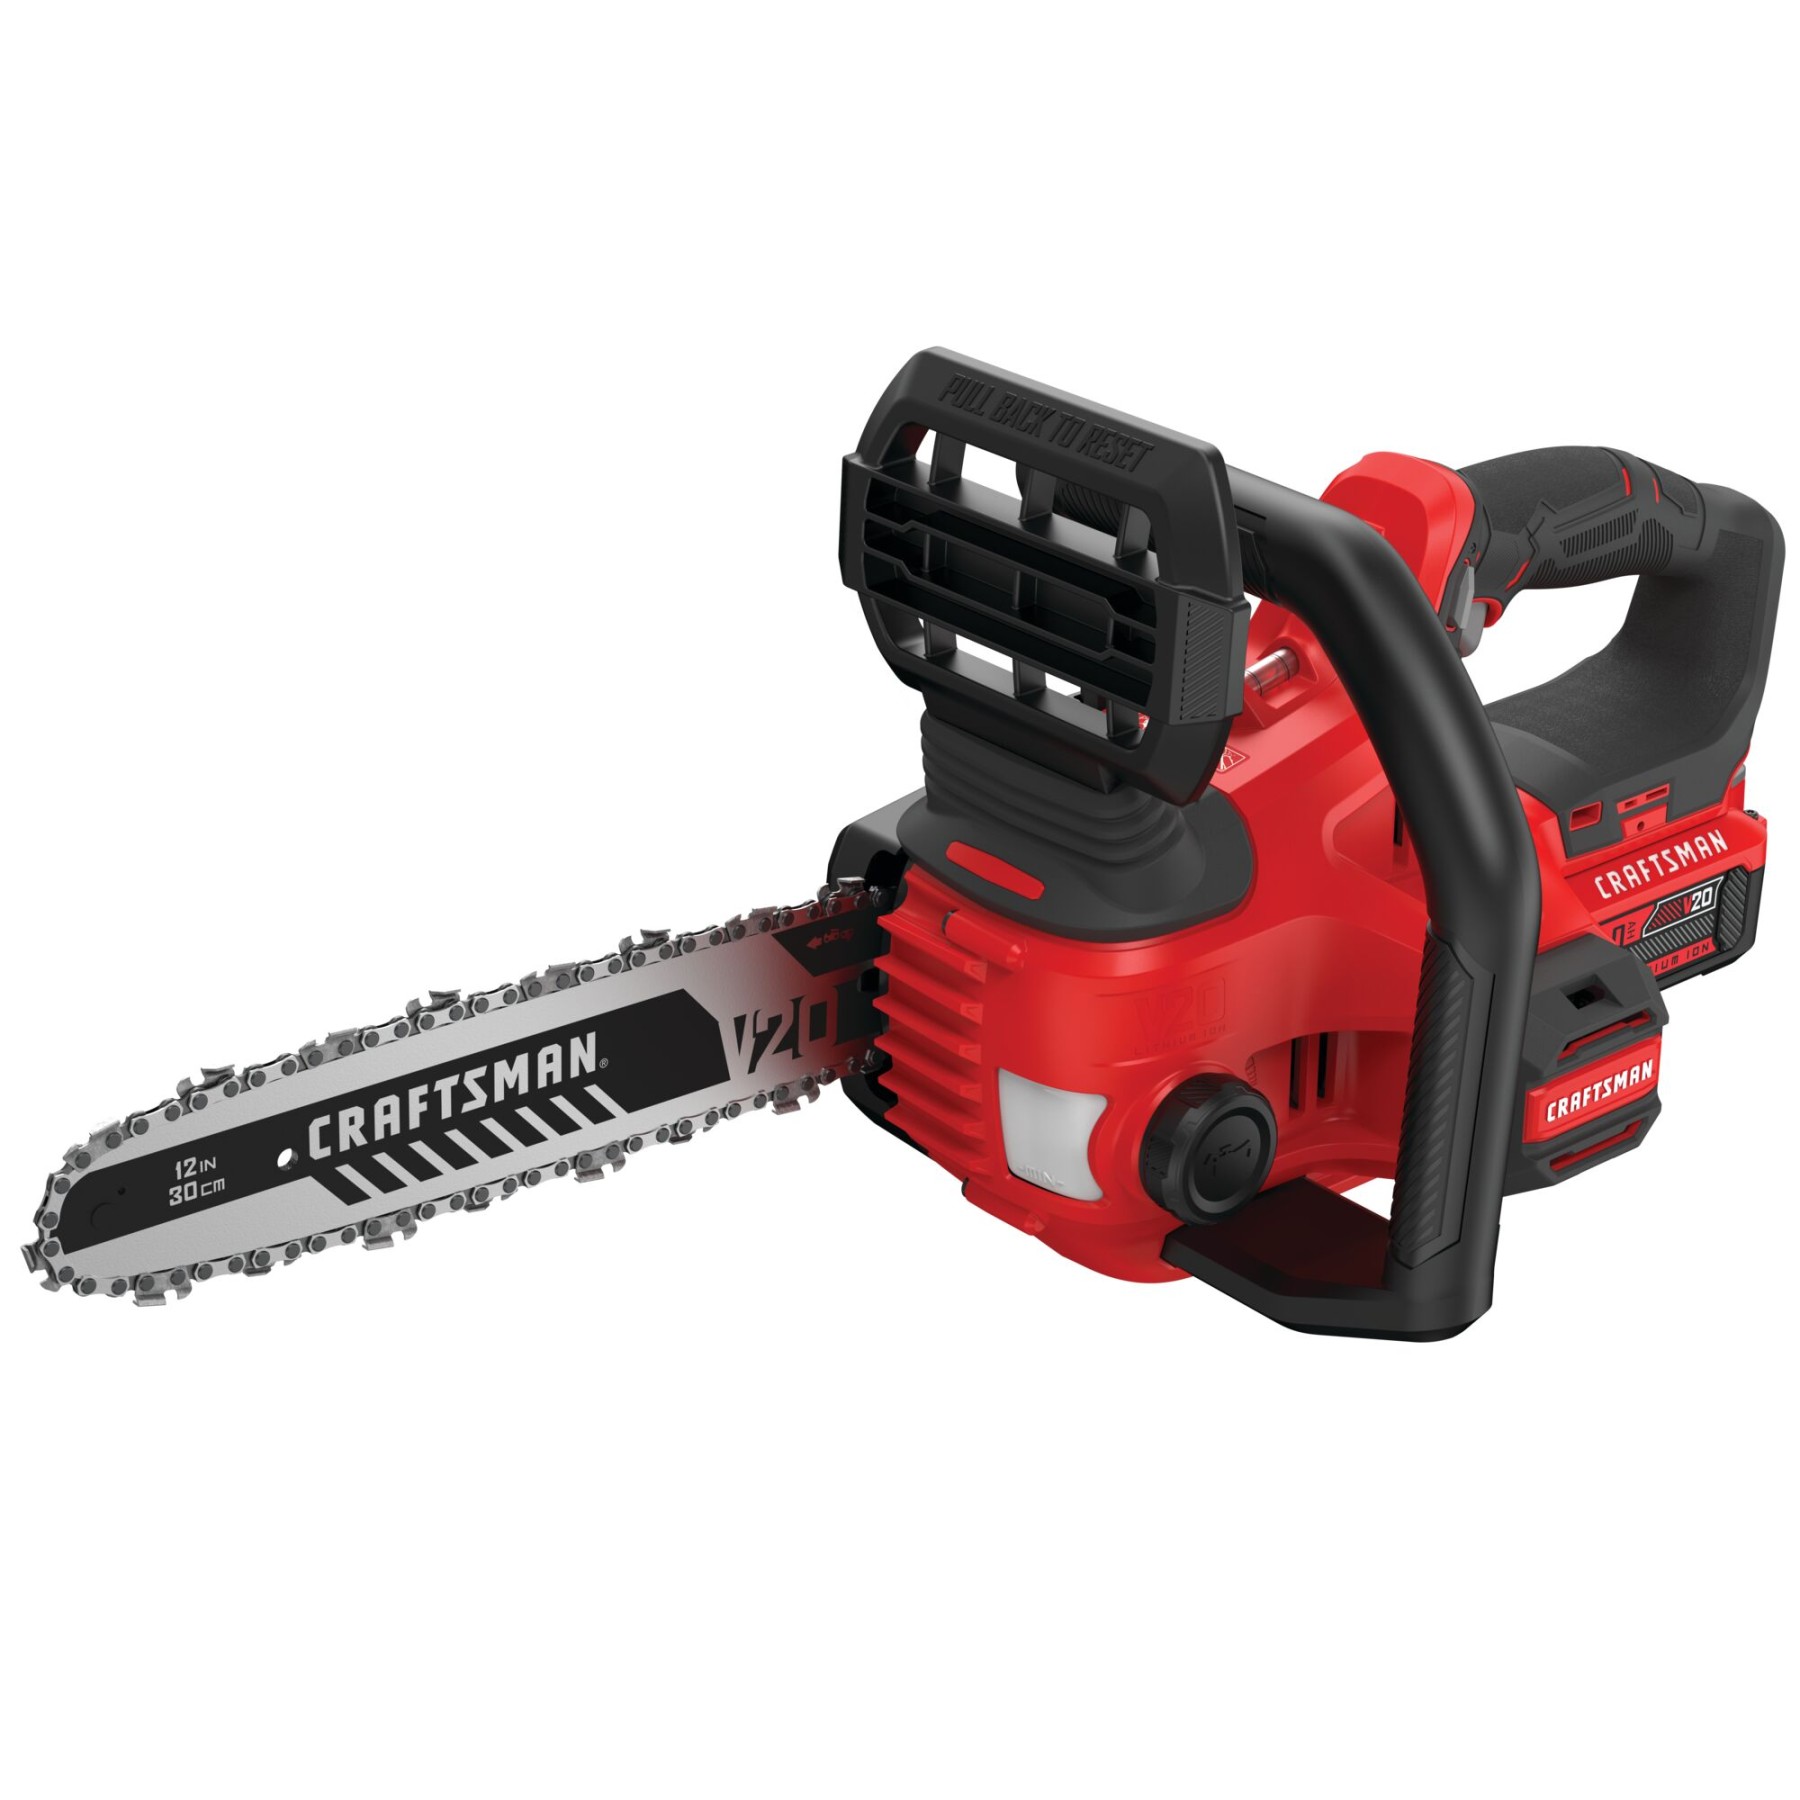 CRAFTSMAN V -volt Max -in Battery  Ah Chainsaw (Battery and